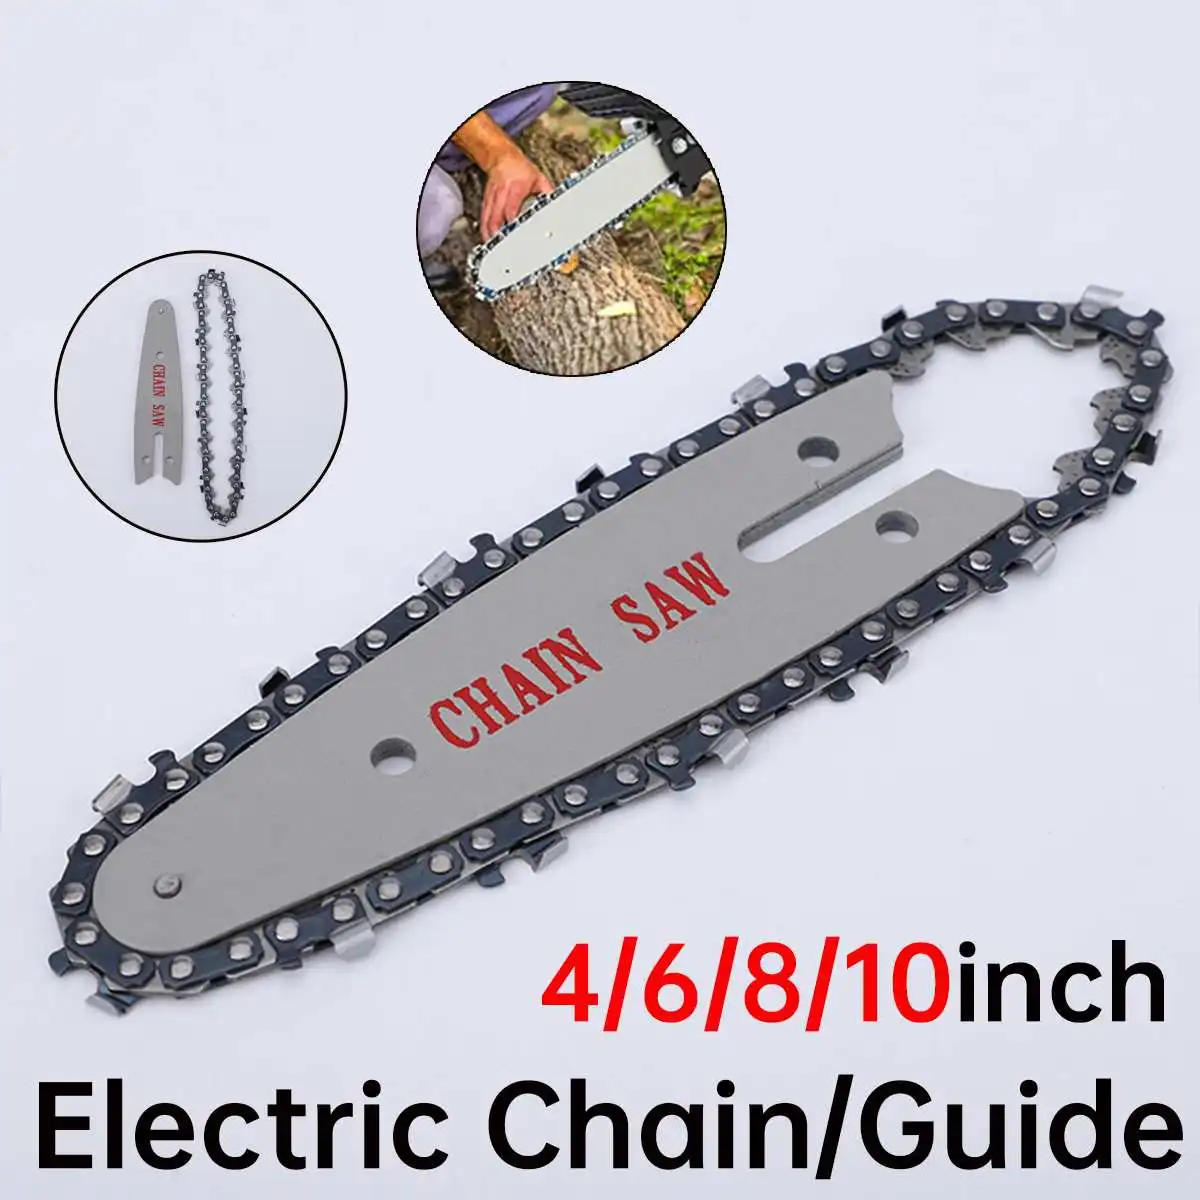 

4/6/8/10 inch Chain Guide Electric Chainsaw Guide Chains Used For Logging Pruning Saw Electric Saw Chain Accessories Tools